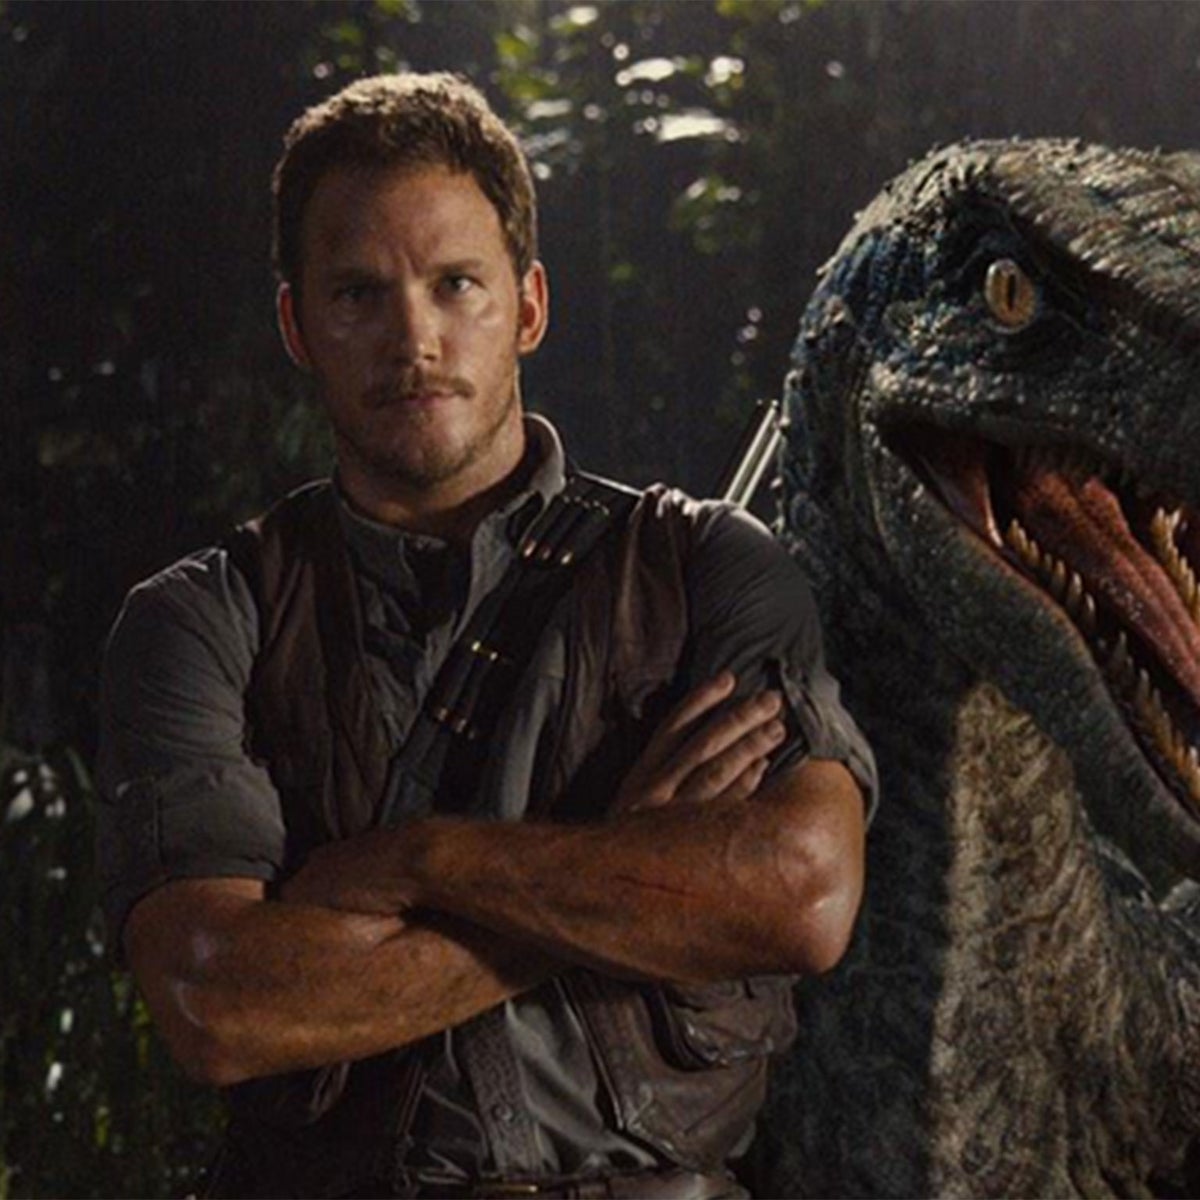 Jurassic World: Scientists criticise 'dumb monster movie' for lack